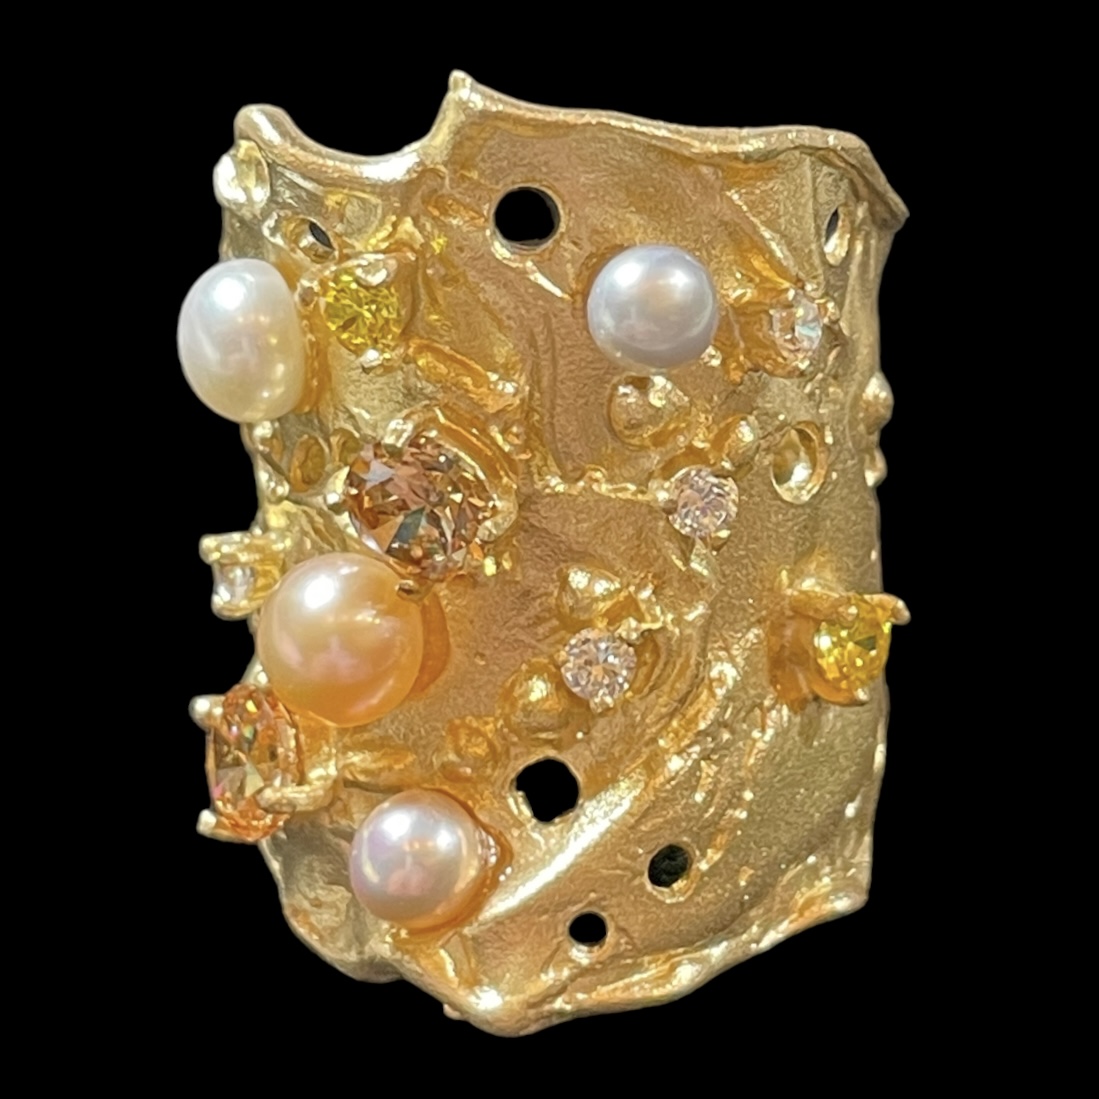 Wide and matte gilded ring with pearls and color stones